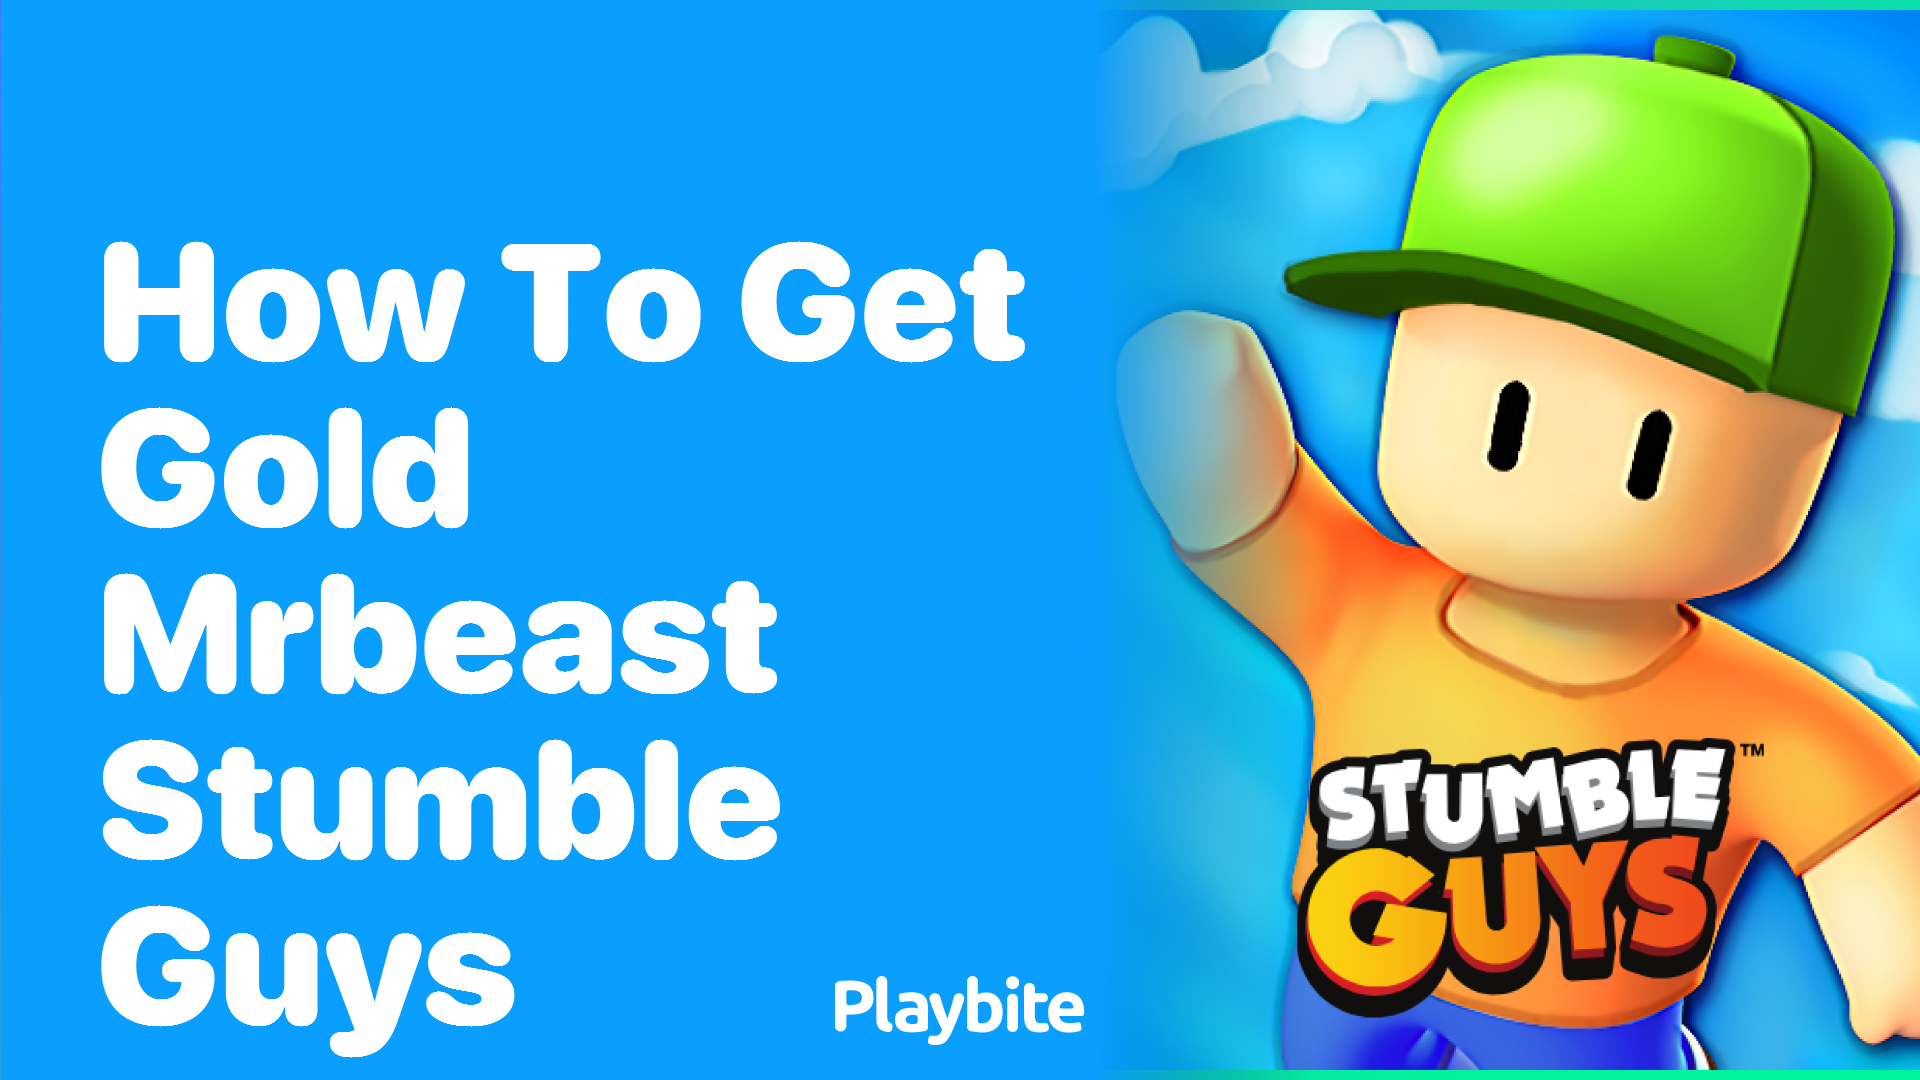 How to Get the Gold MrBeast Skin in Stumble Guys